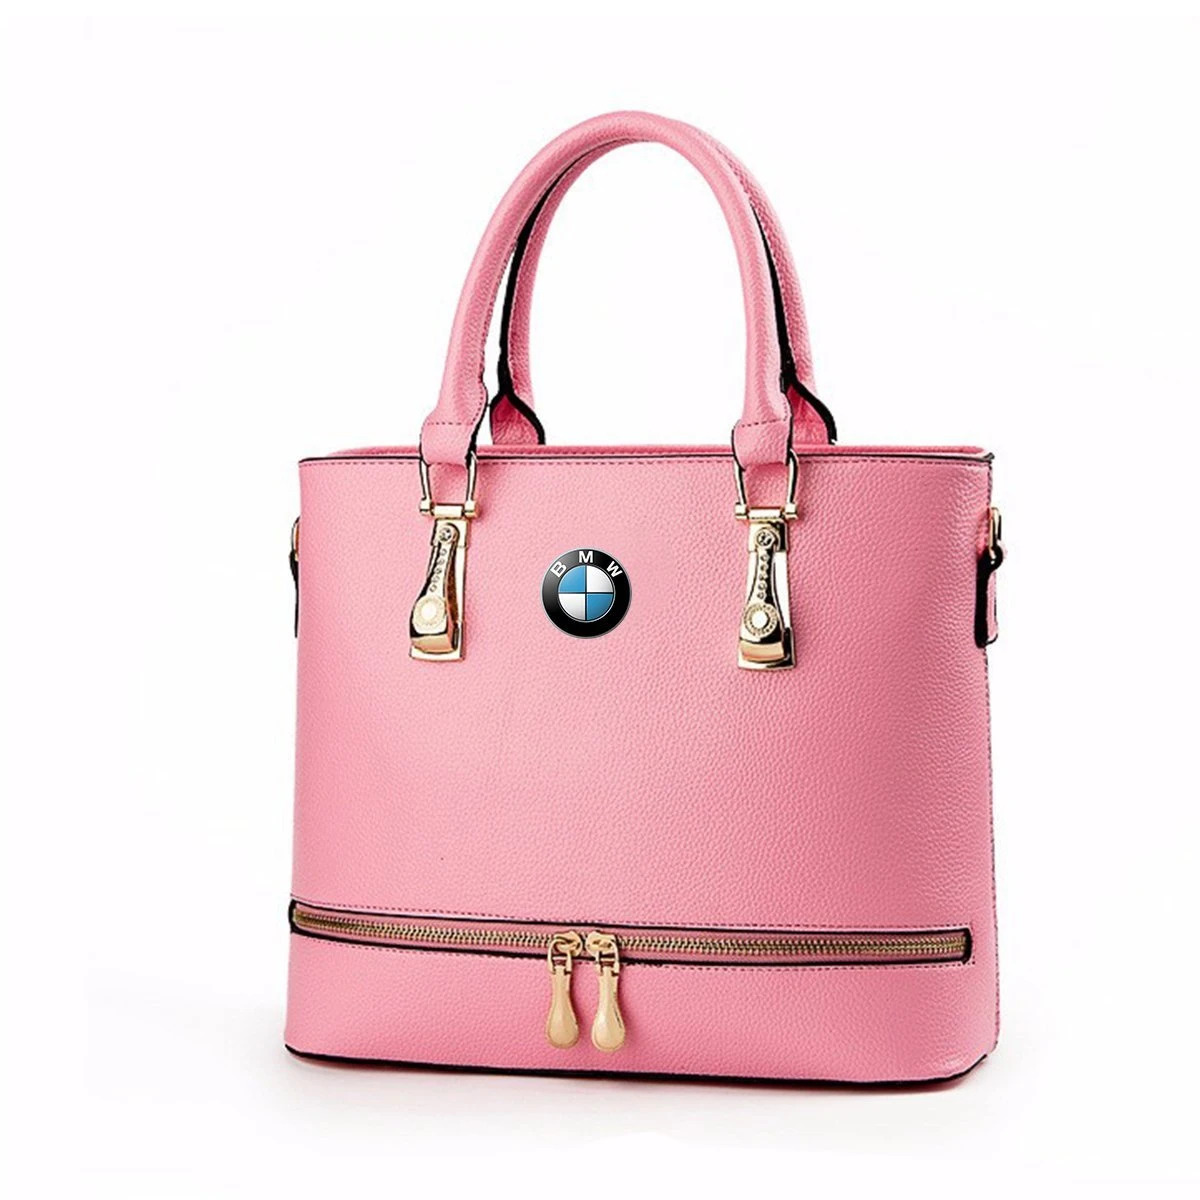 Fresh colours for stylish bags. The BMW Lifestyle Accessories